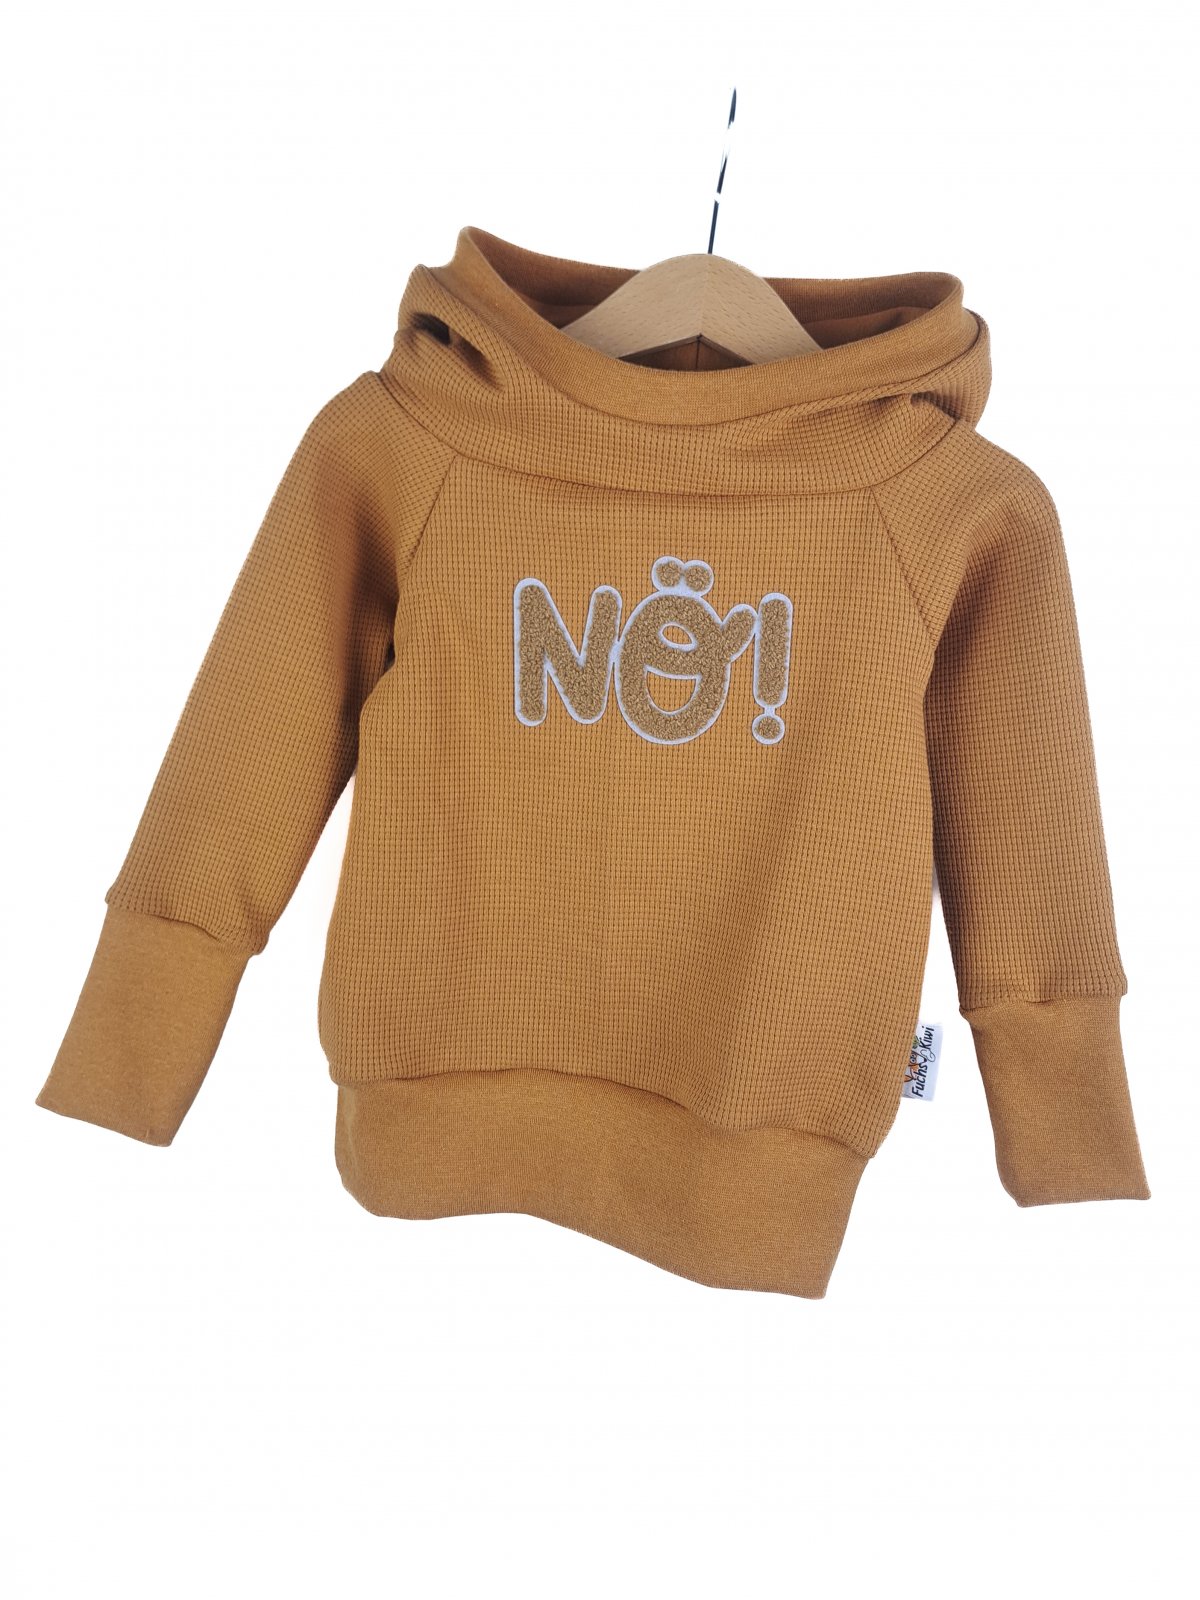 Hoodie Nö Patch taupe/curry